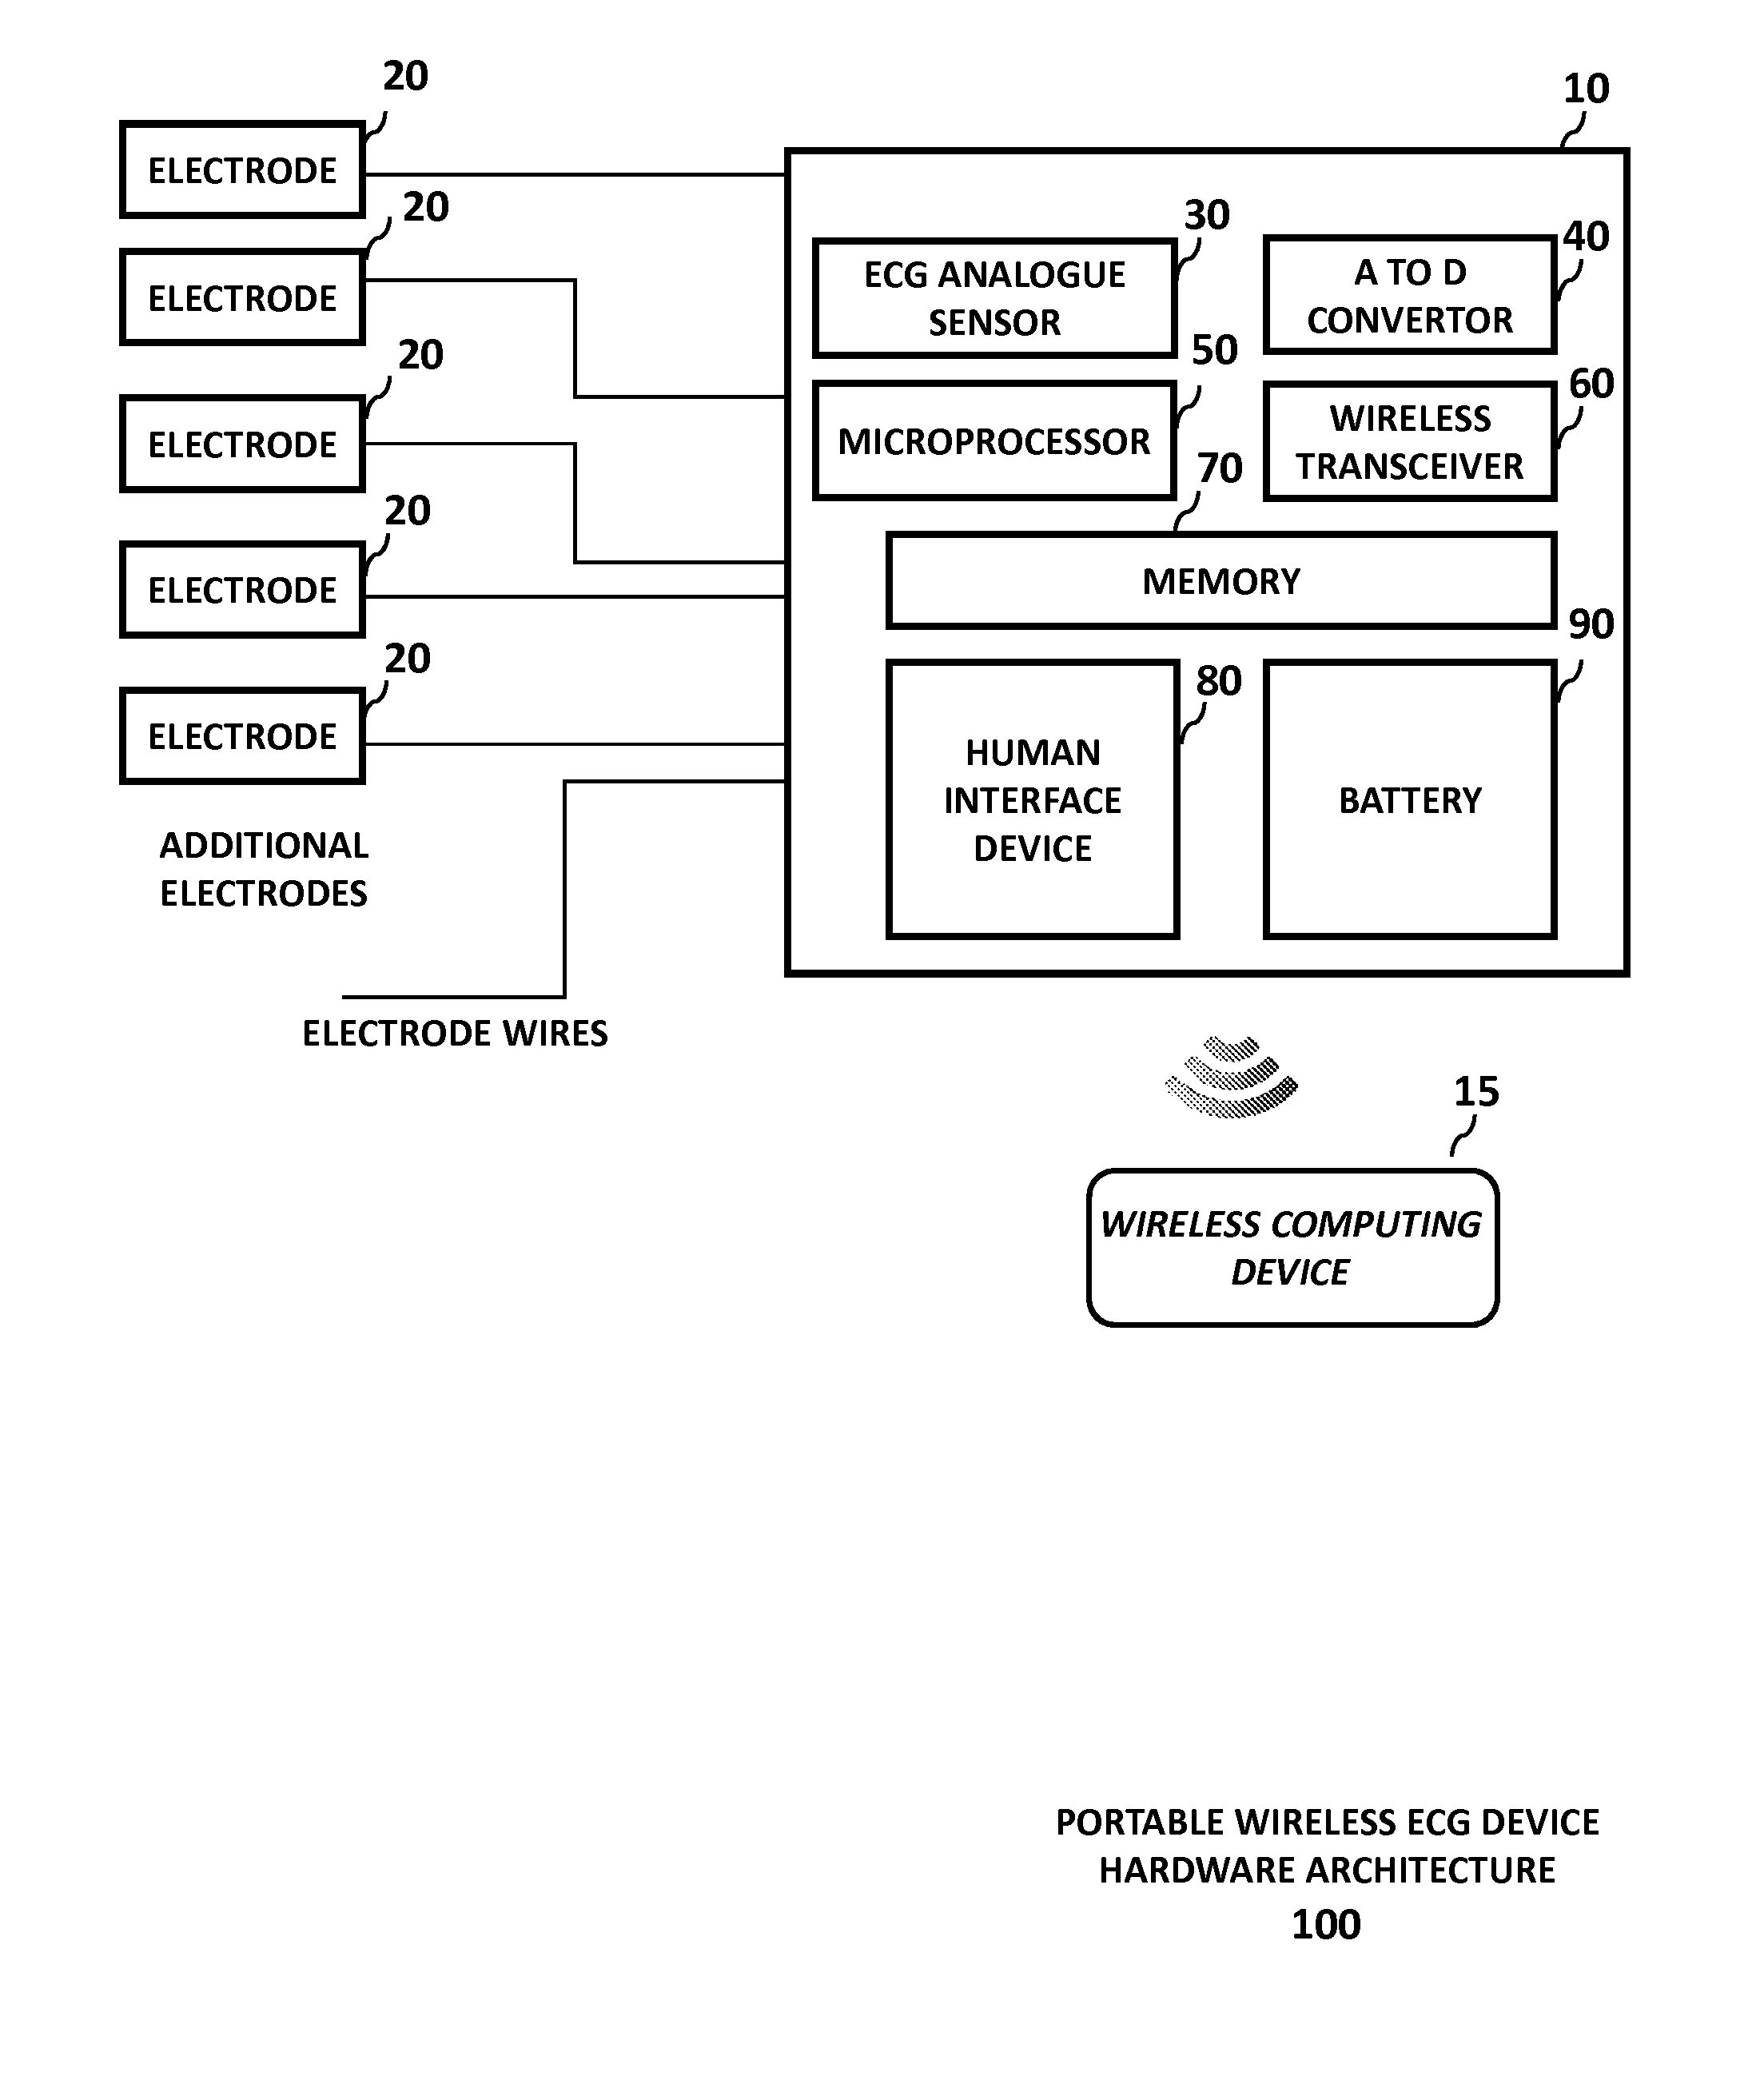 Method and apparatus for an interactively programmable ECG device with wireless communication interface to remote computing devices